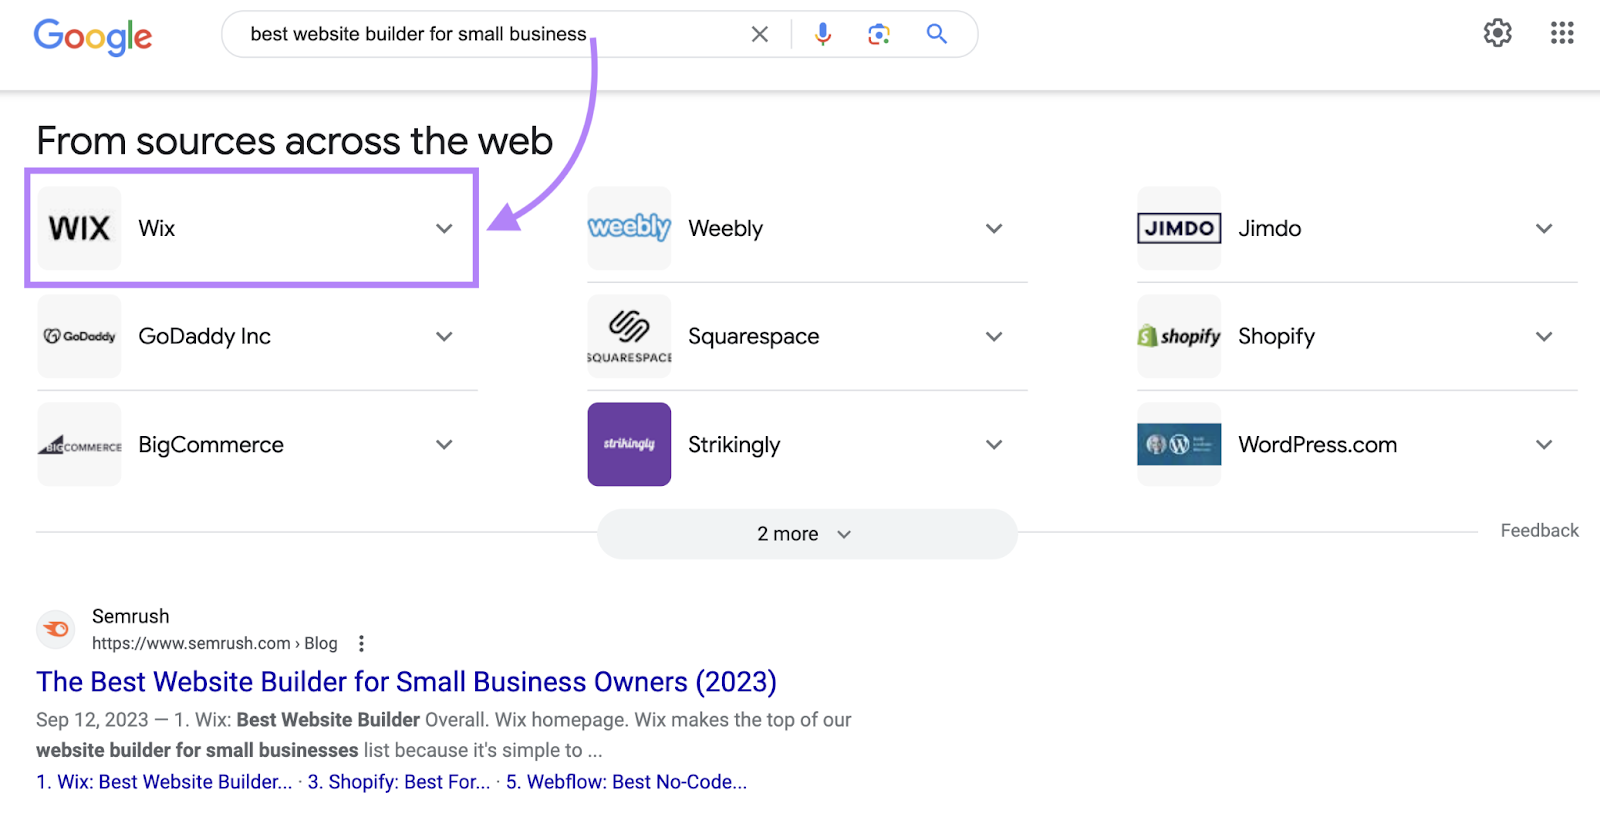 Wix is listed as a popular choice on Google for “best website builder for small business" query